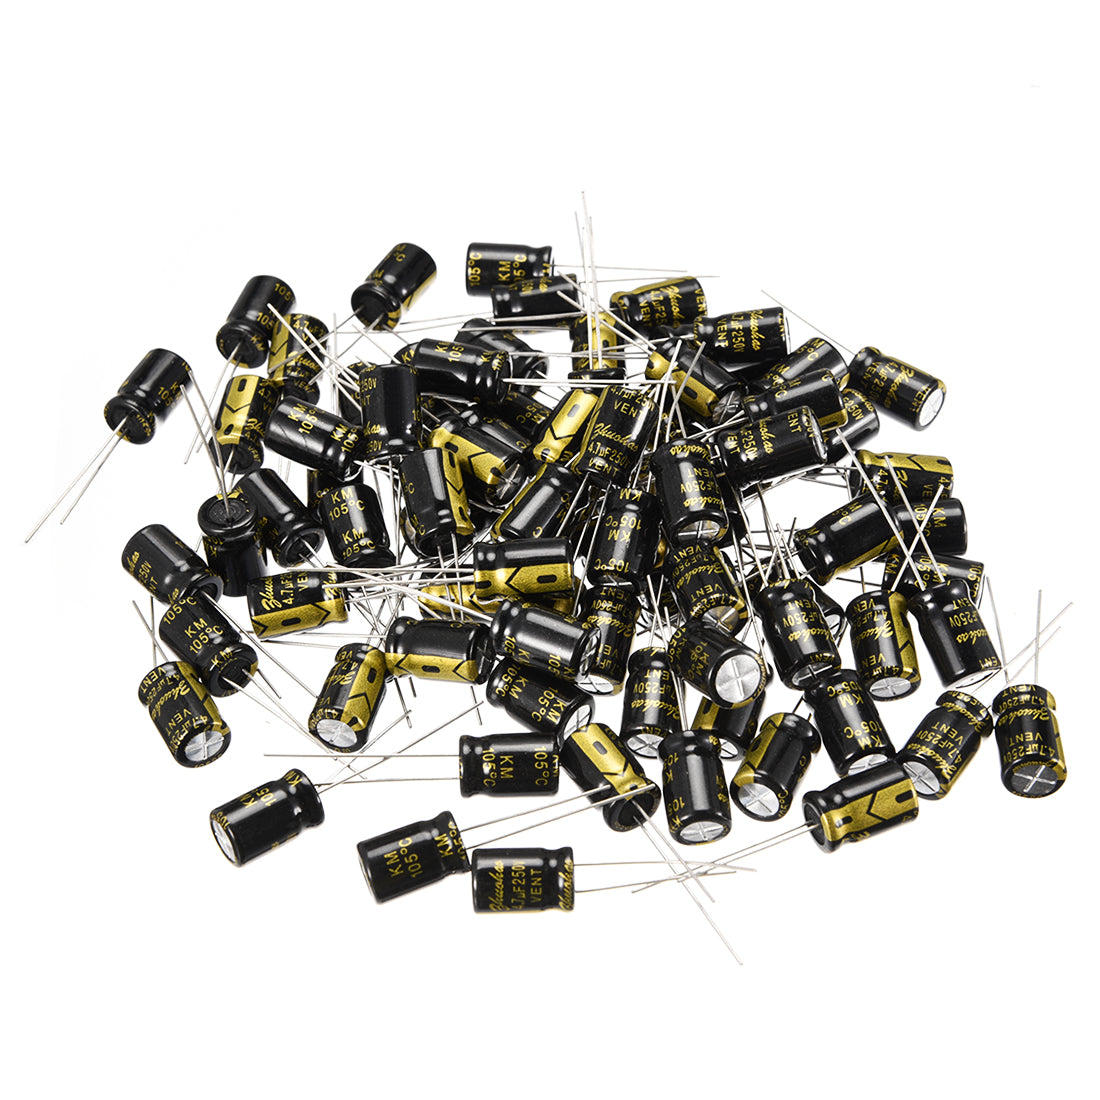 uxcell Uxcell Aluminum Radial Electrolytic Capacitor with 4.7uF 250V 105 Celsius Life 2000H 8 x 12 mm Black 80pcs